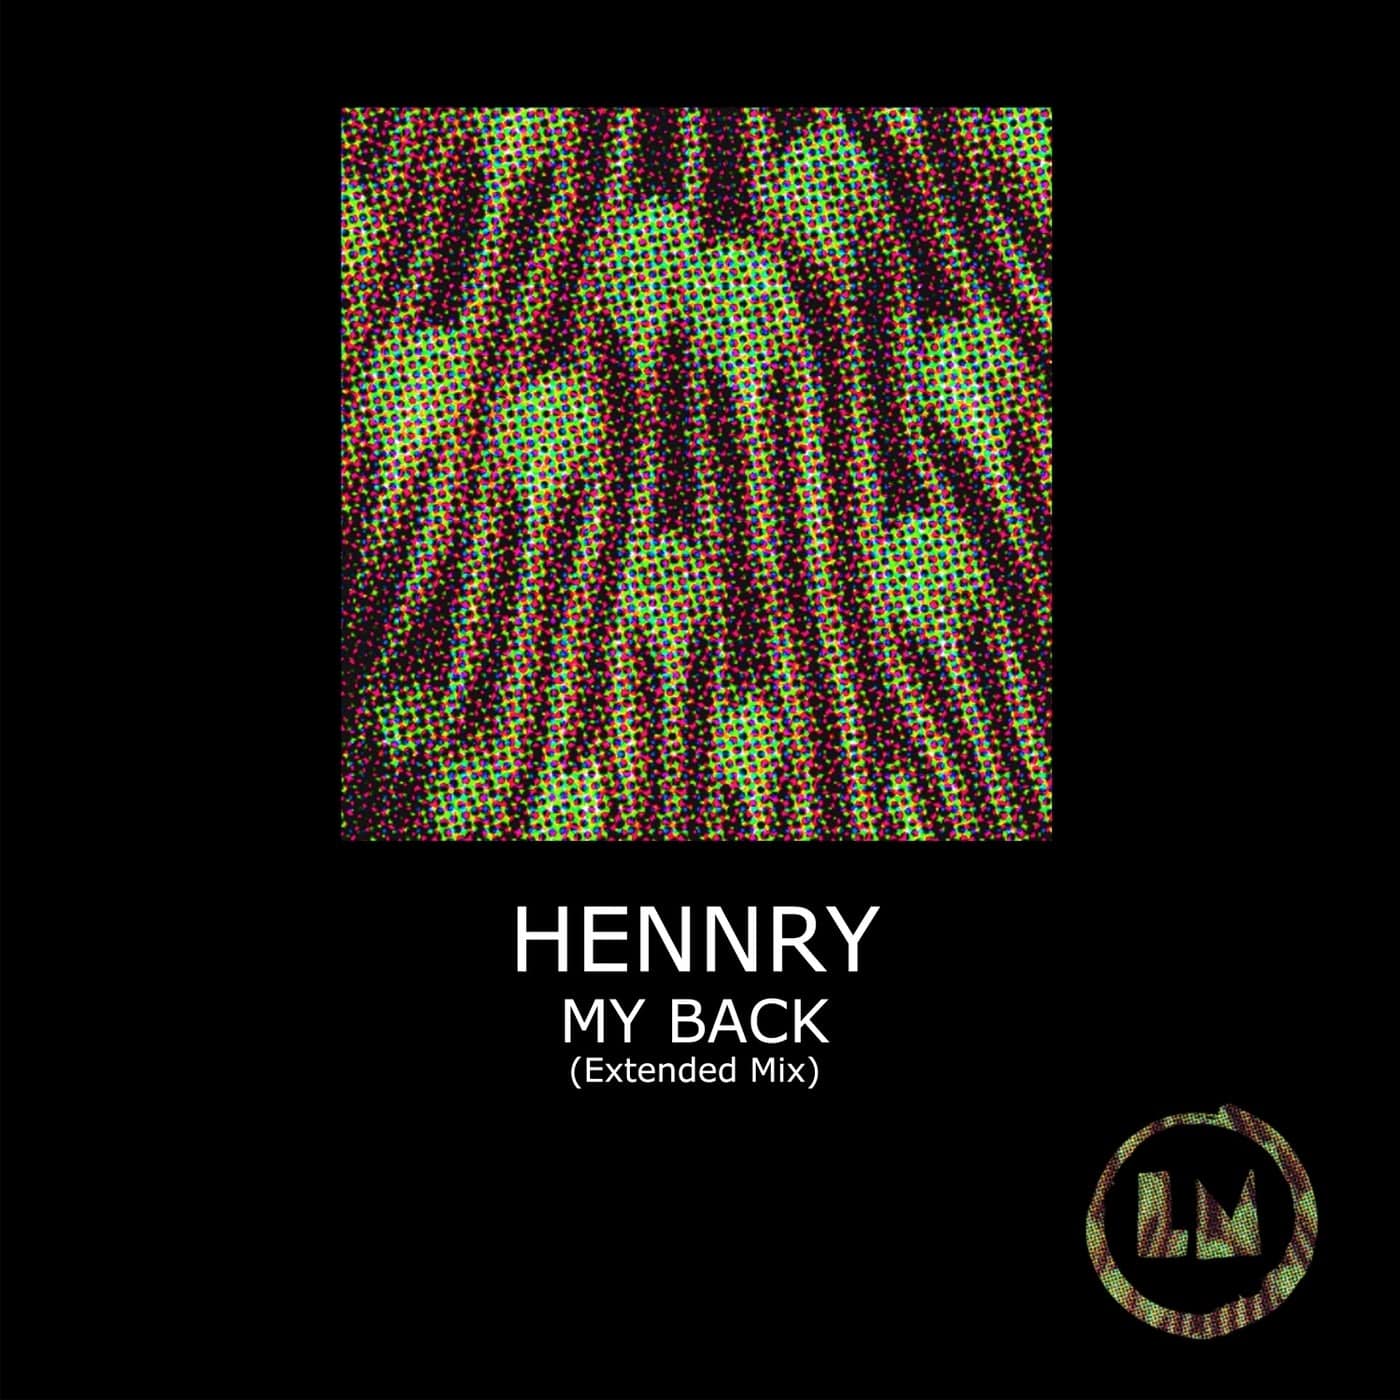 image cover: Hennry, Candil - My Back (Extended Mix) / LPS315D